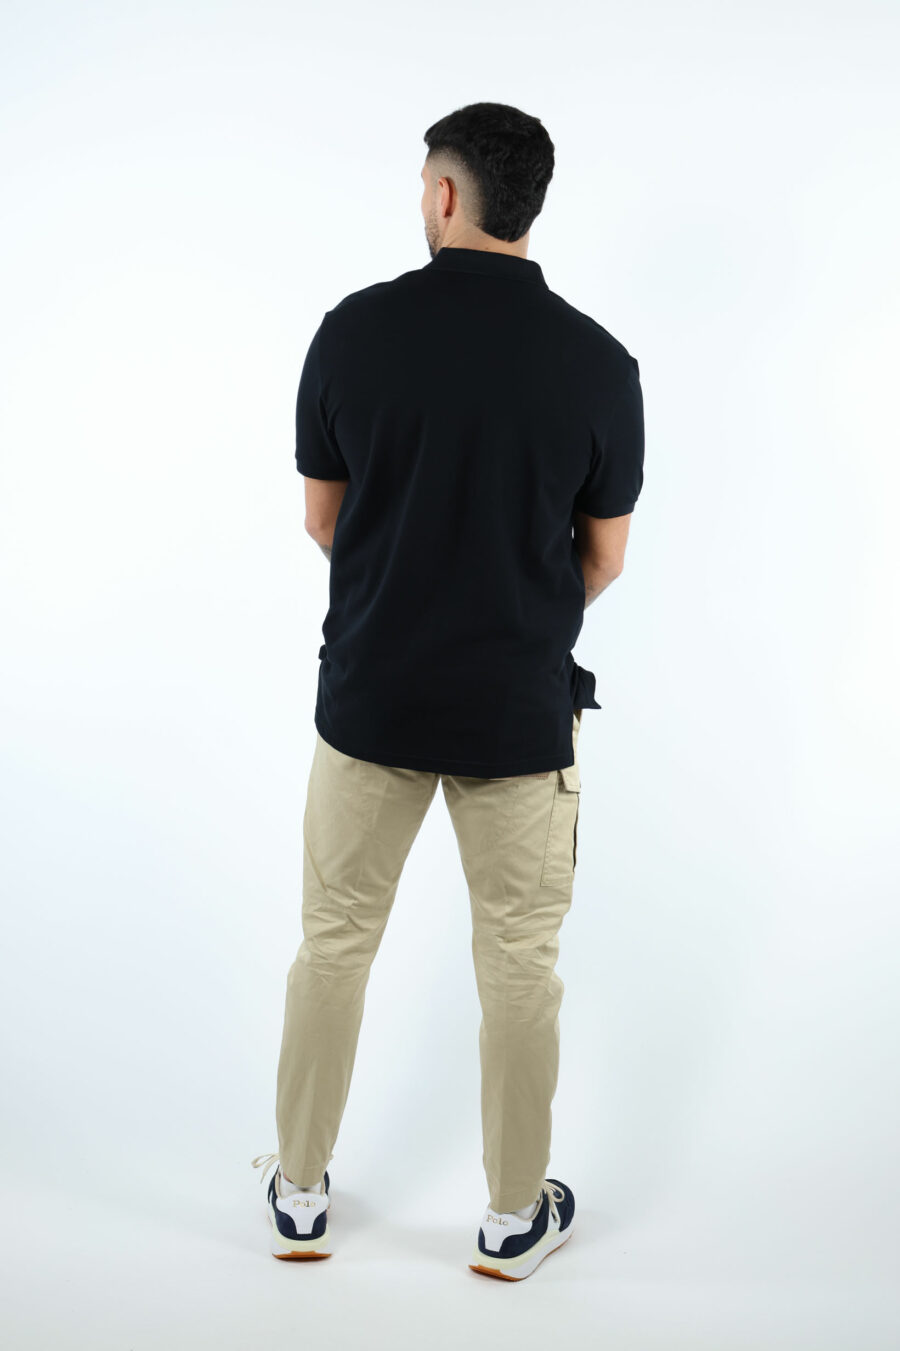 Black polo shirt with logo "in love we trust" - 106973